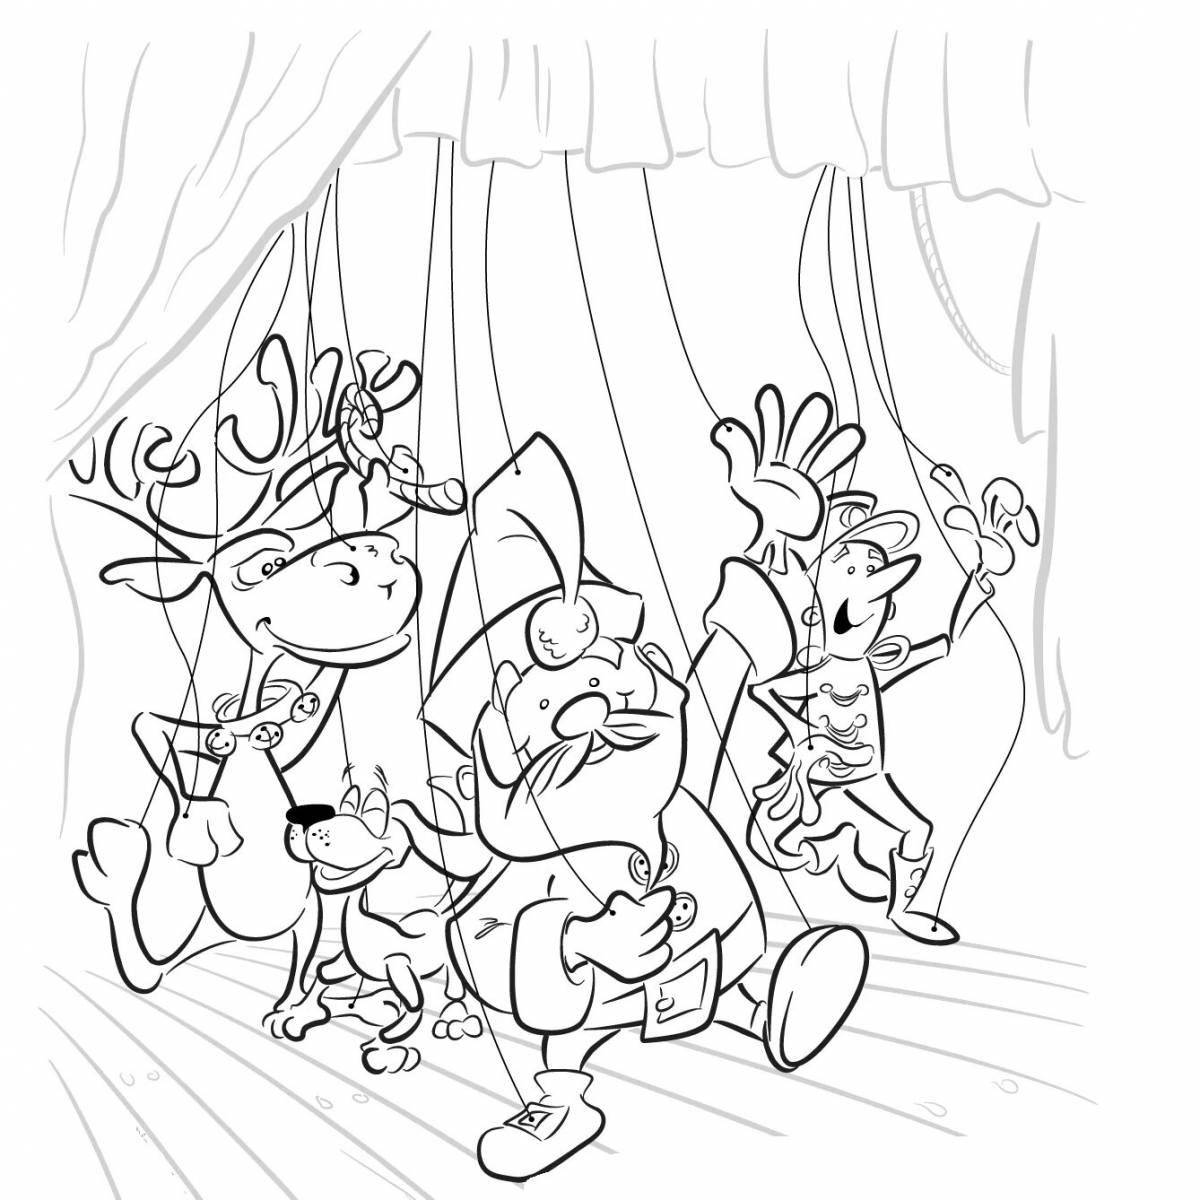 Coloring page joyful puppet theater